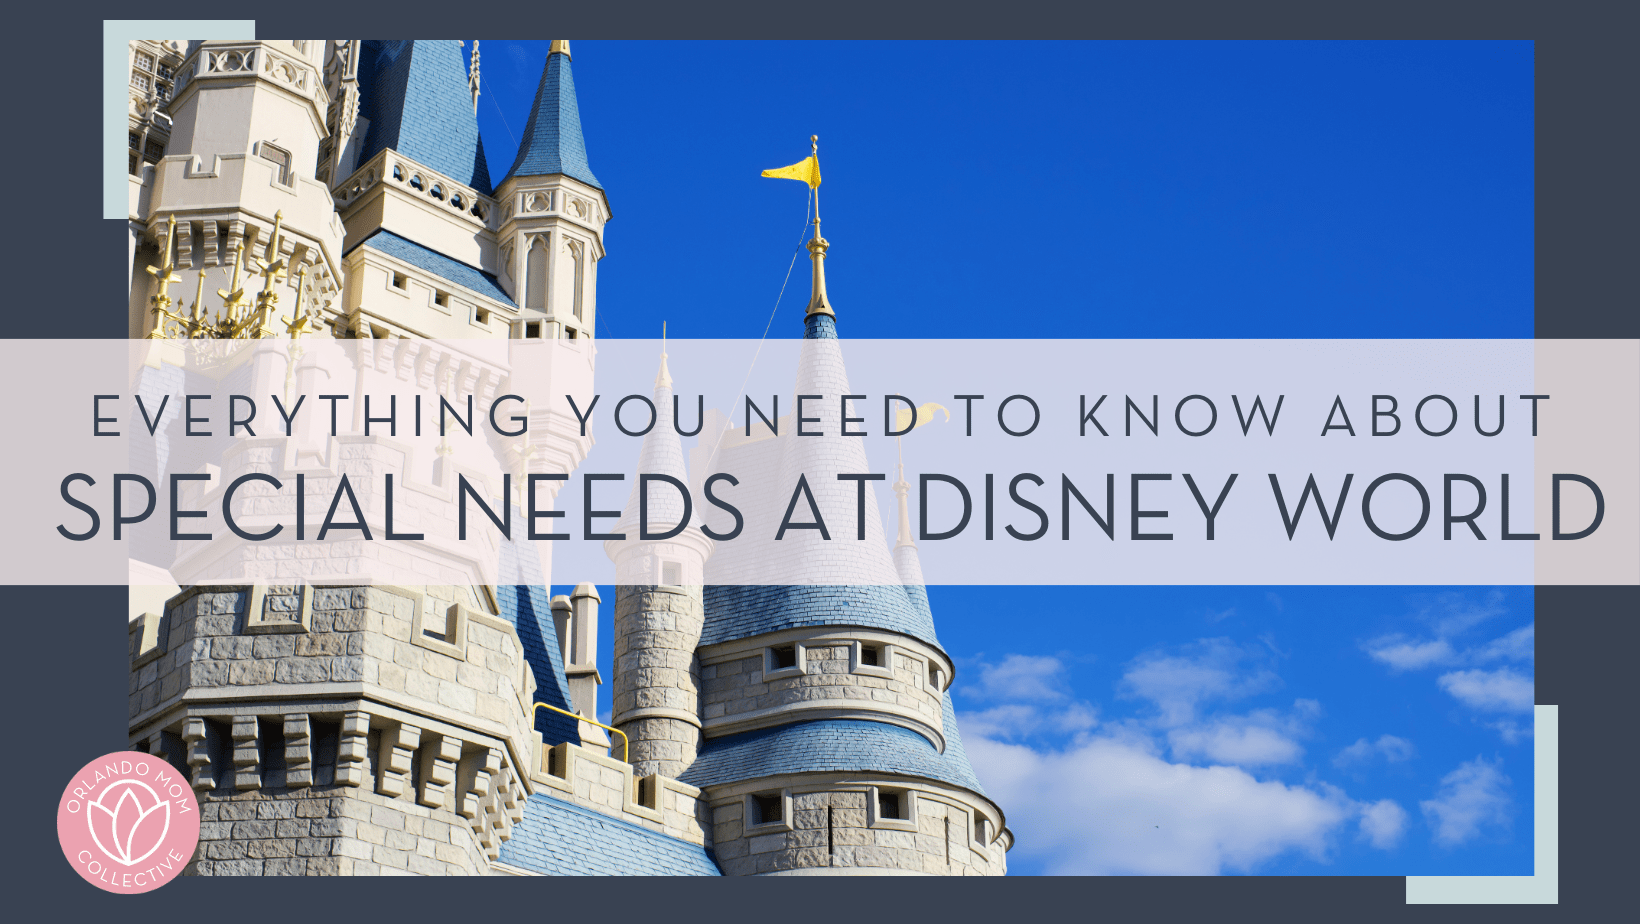 Brian mcgowan via unsplash photo of the side of cinderella castle with words 'everything you need to know about special needs at disney world' on top